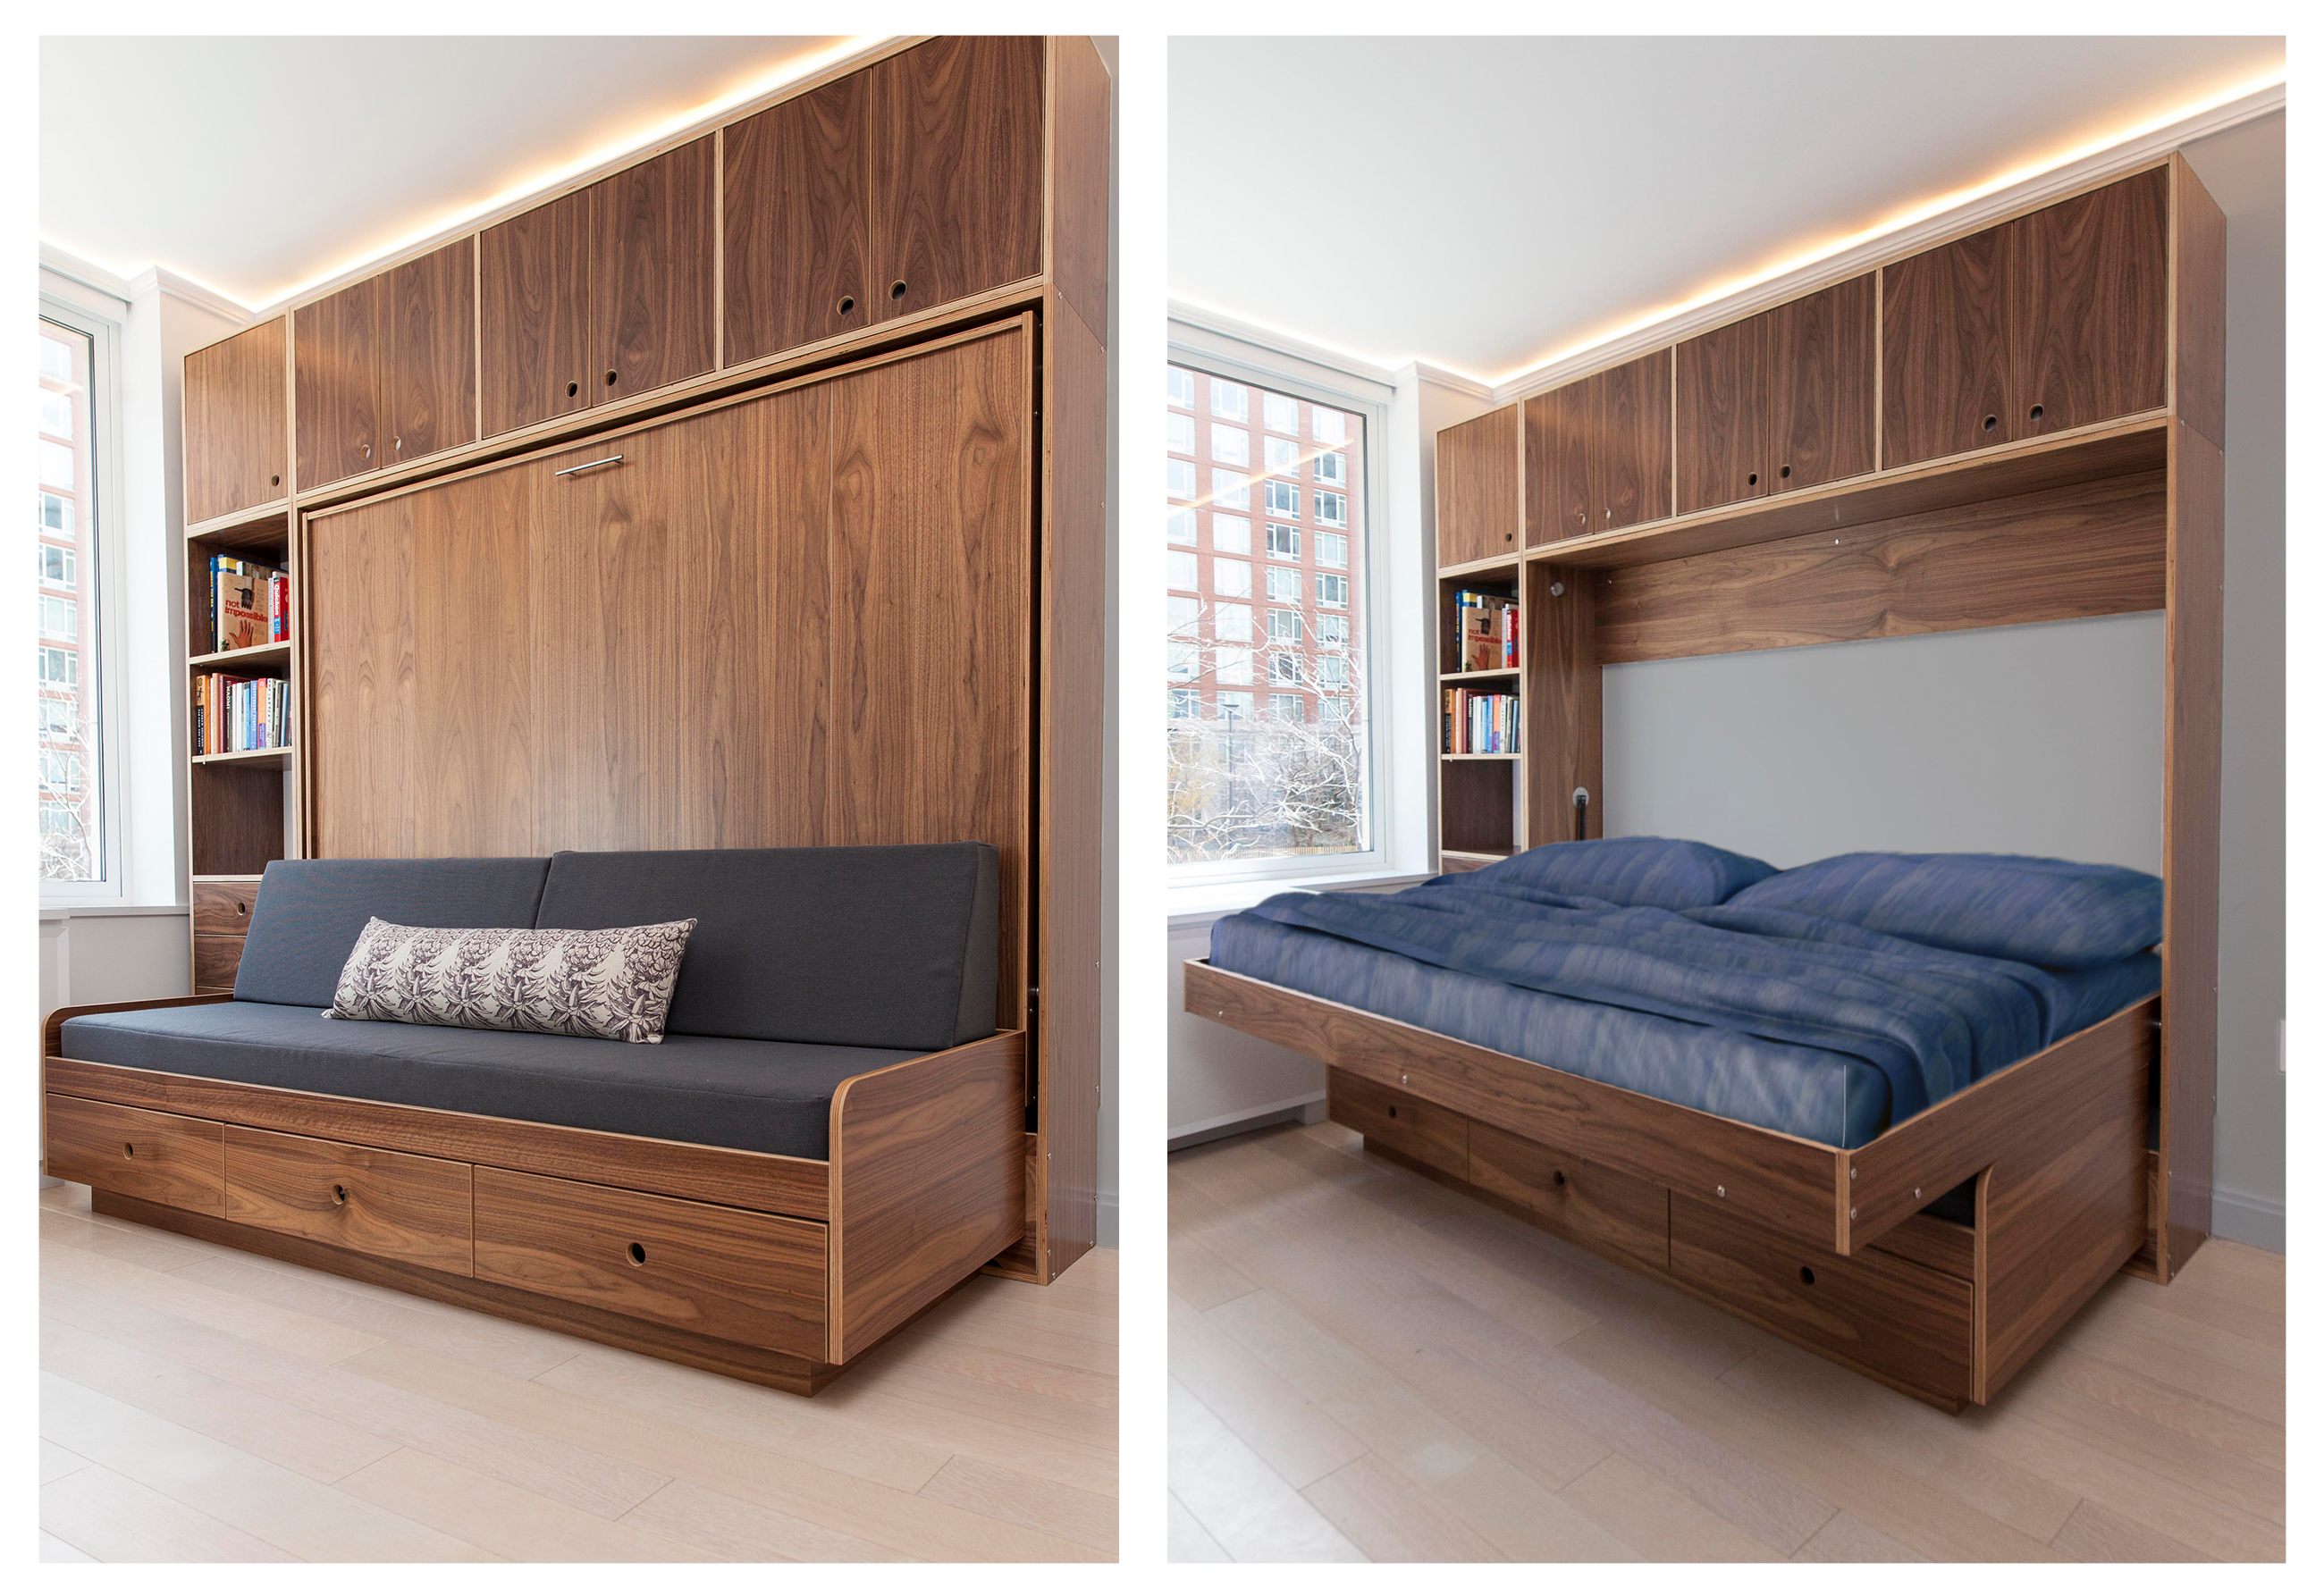 Split image of a room with a murphy bed in sofa and bed mode, wooden finish and modern design.